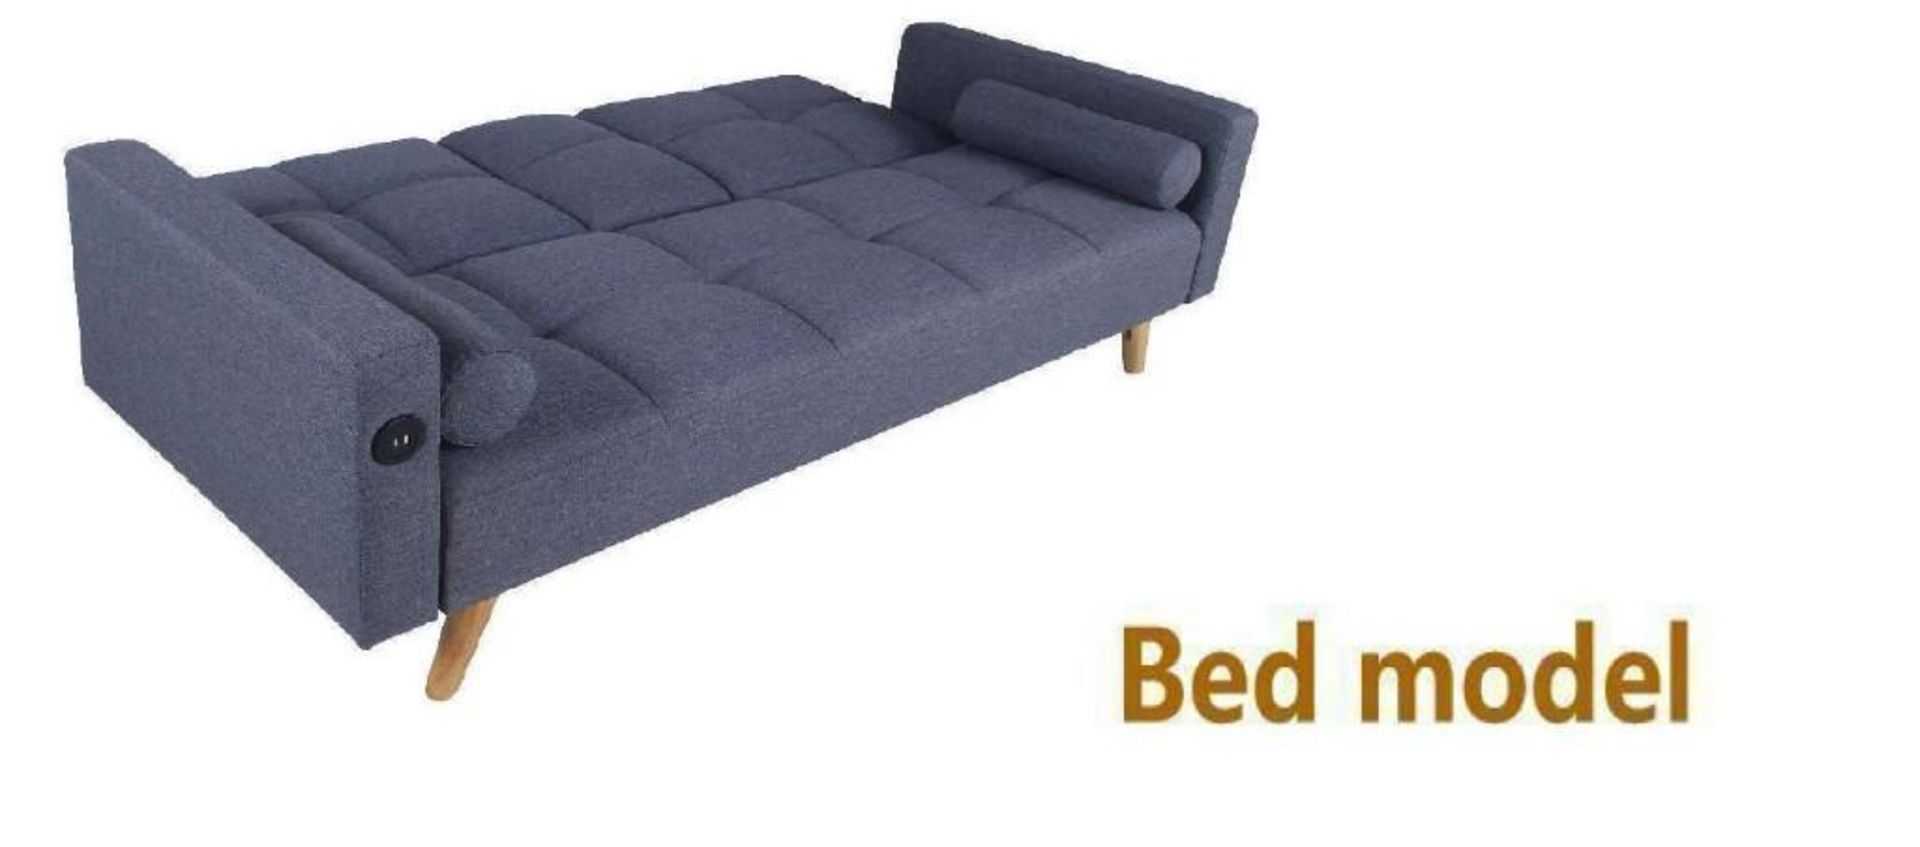 *NO VAT ON HAMMER* Brand new Boxed 2 Seater Clic Clac USB Sofa Bed - Image 6 of 10